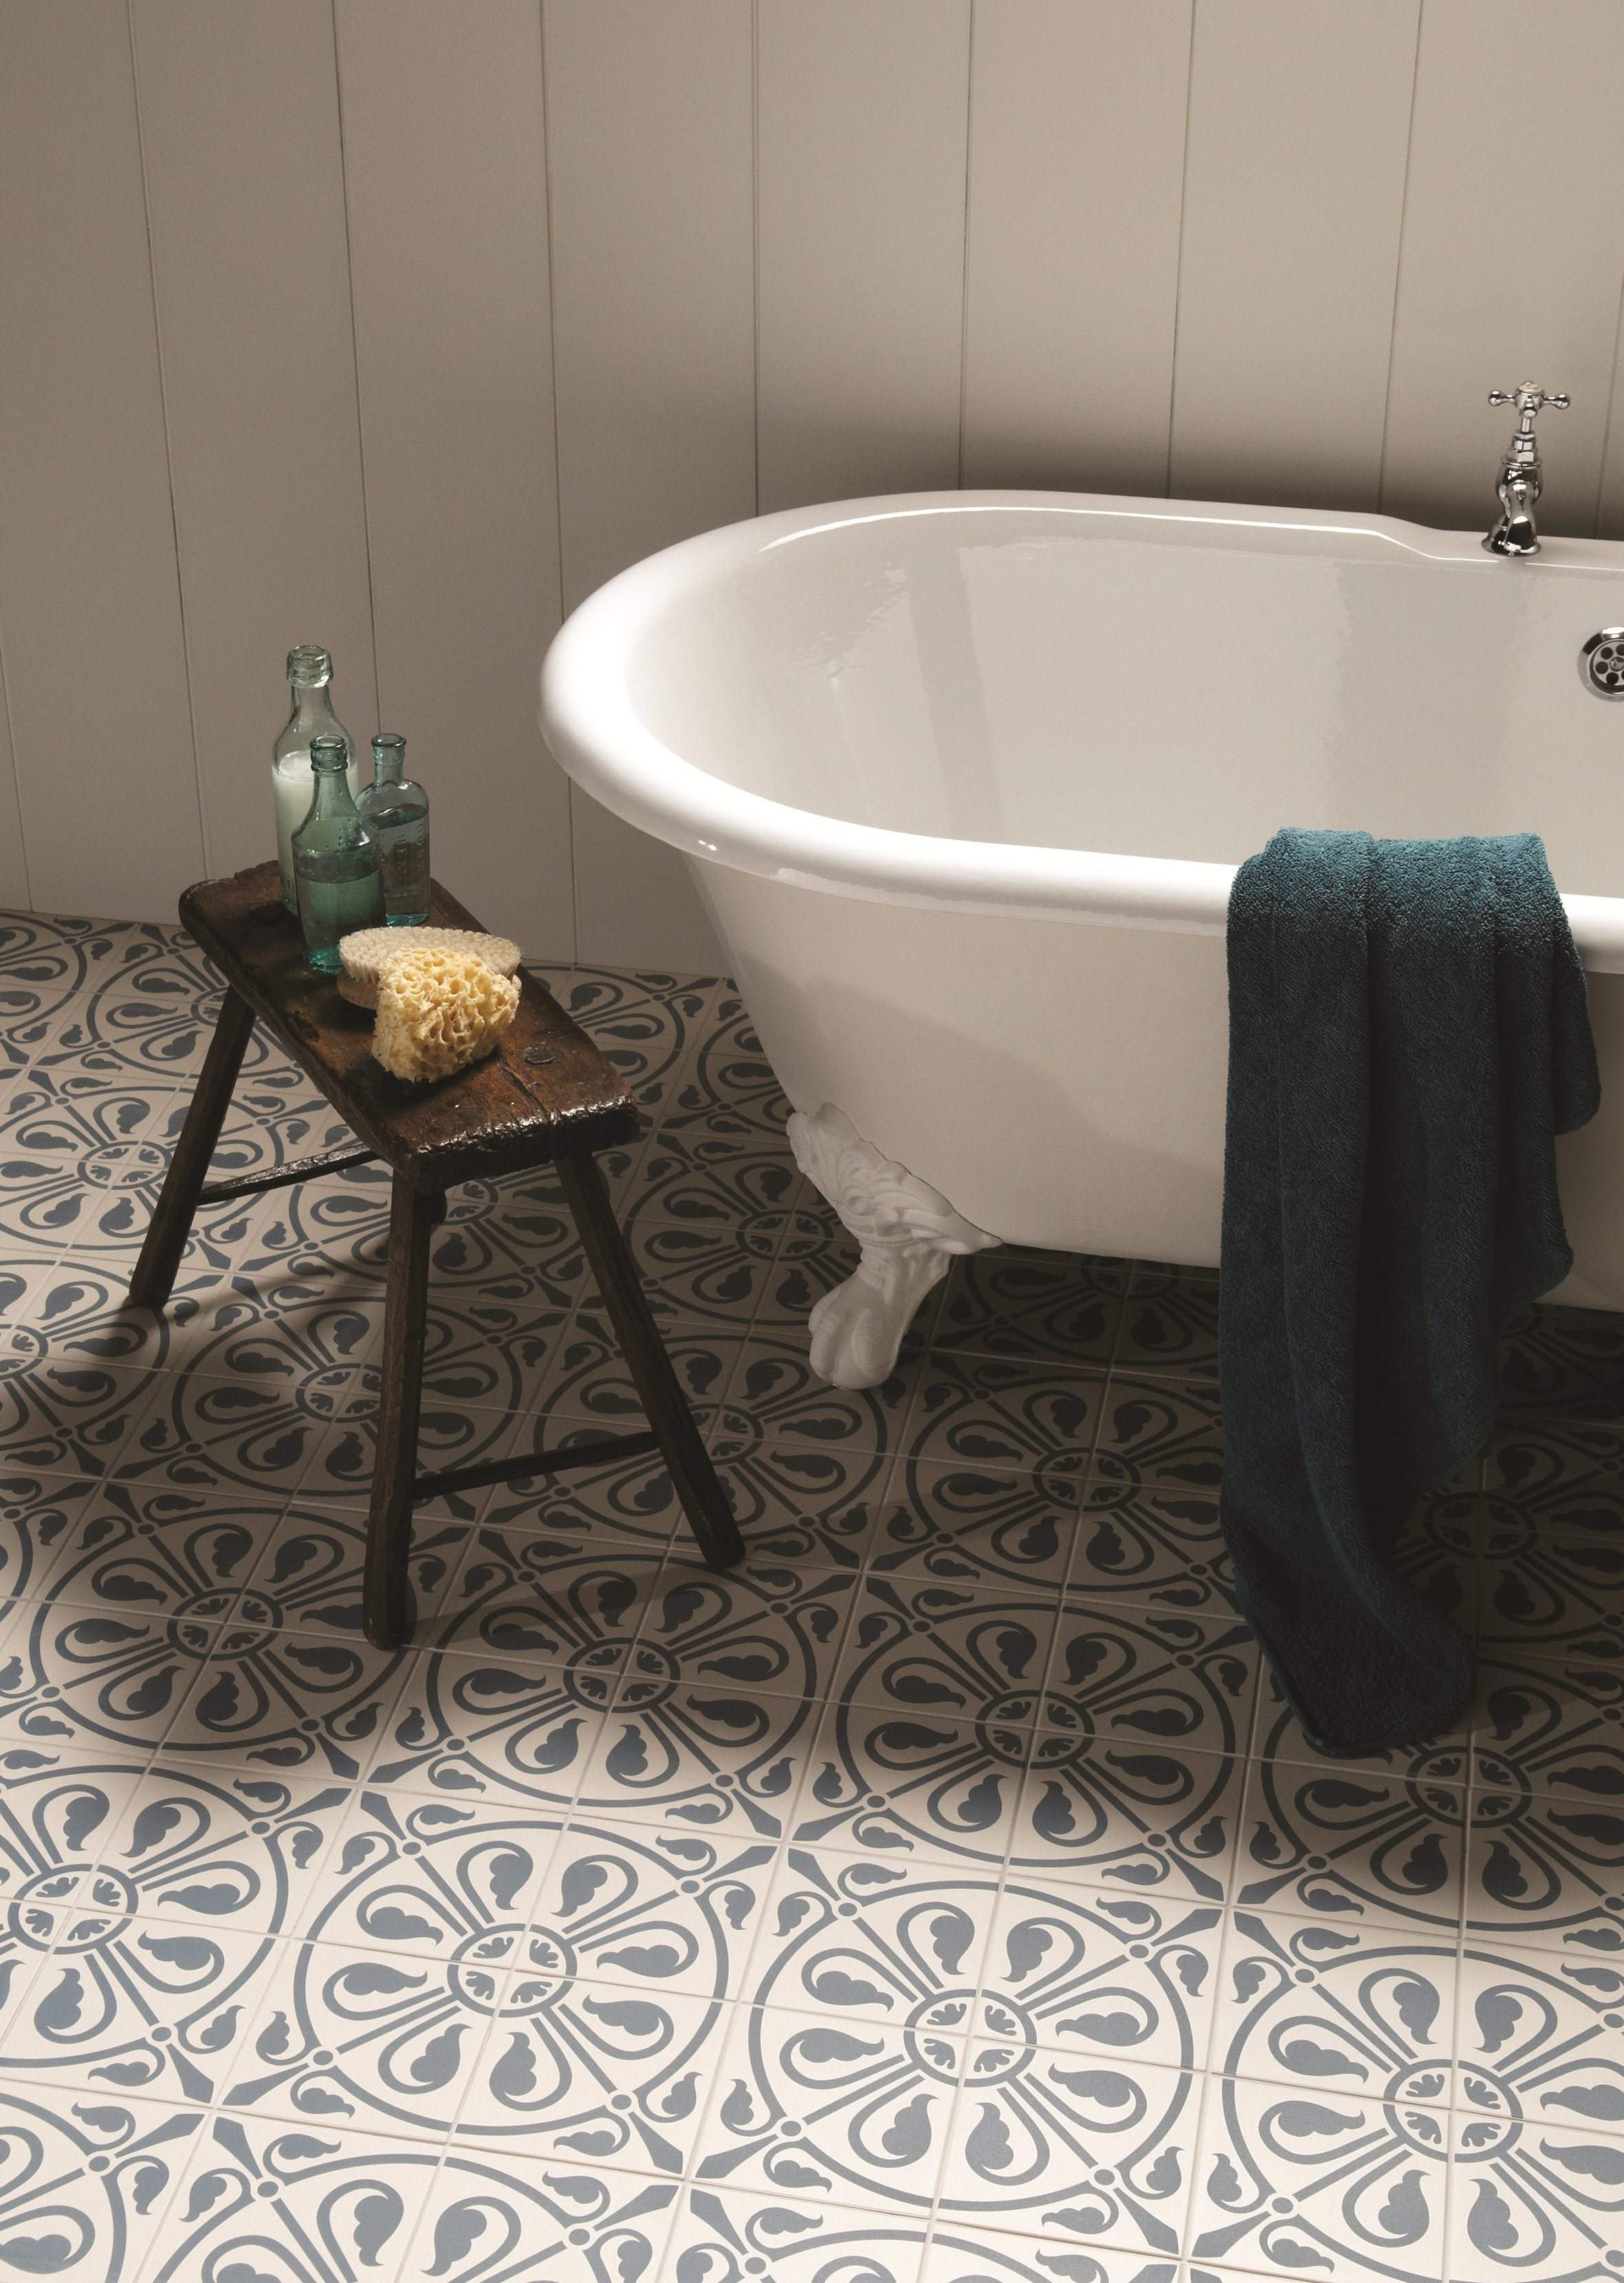 How To Choose Bathroom Tiles Find The, What Size Floor Tile Is Best For A Small Bathroom